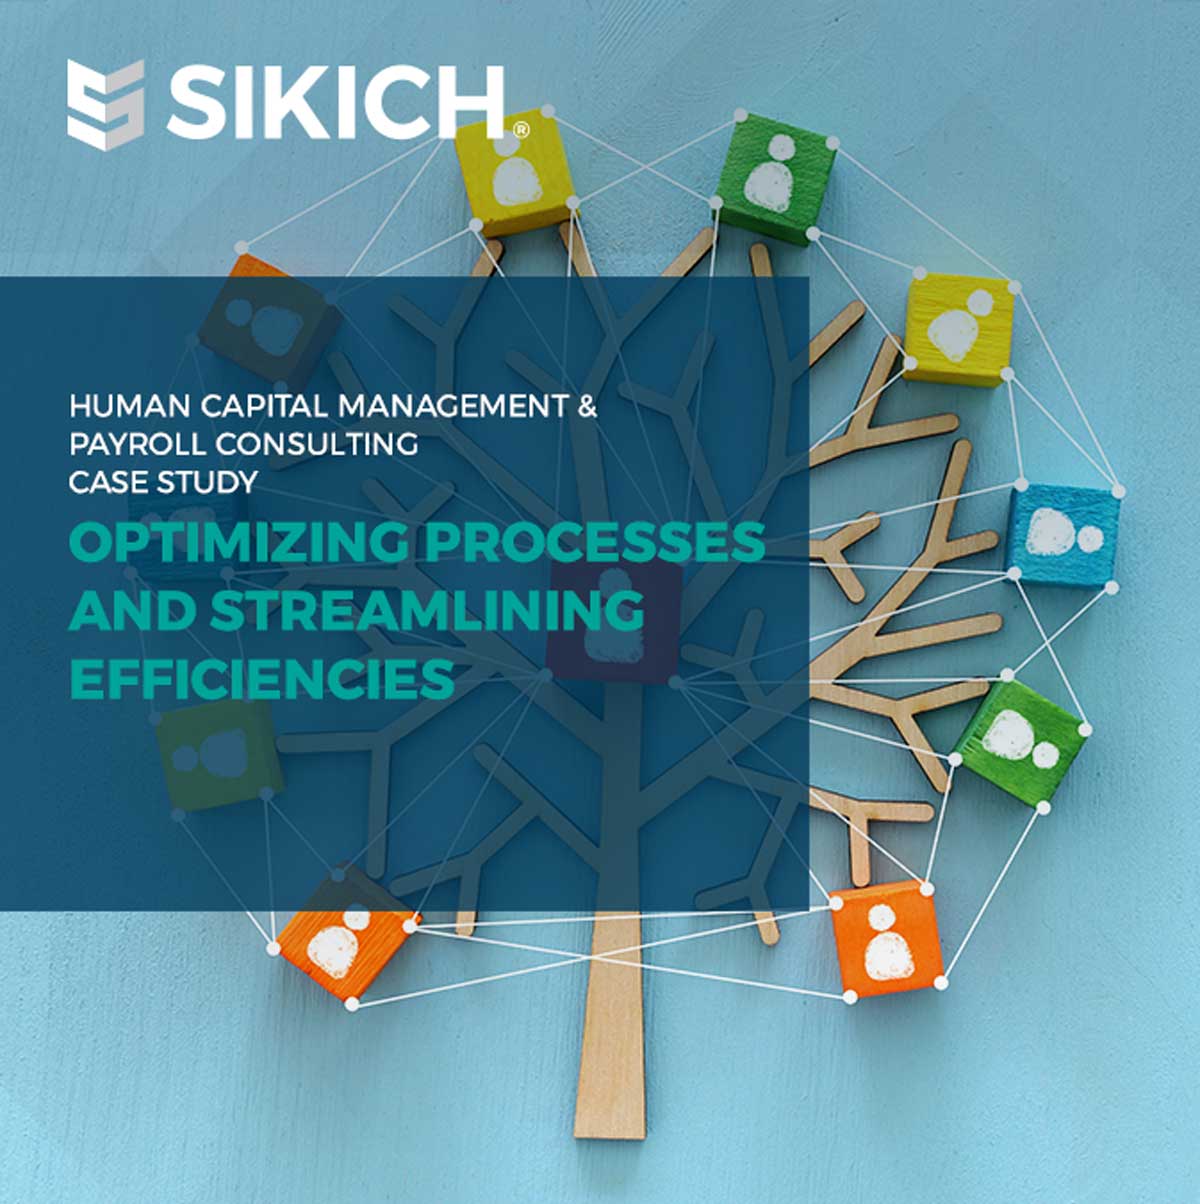 Sikich Optimizing Processes and Streamlining Efficiencies